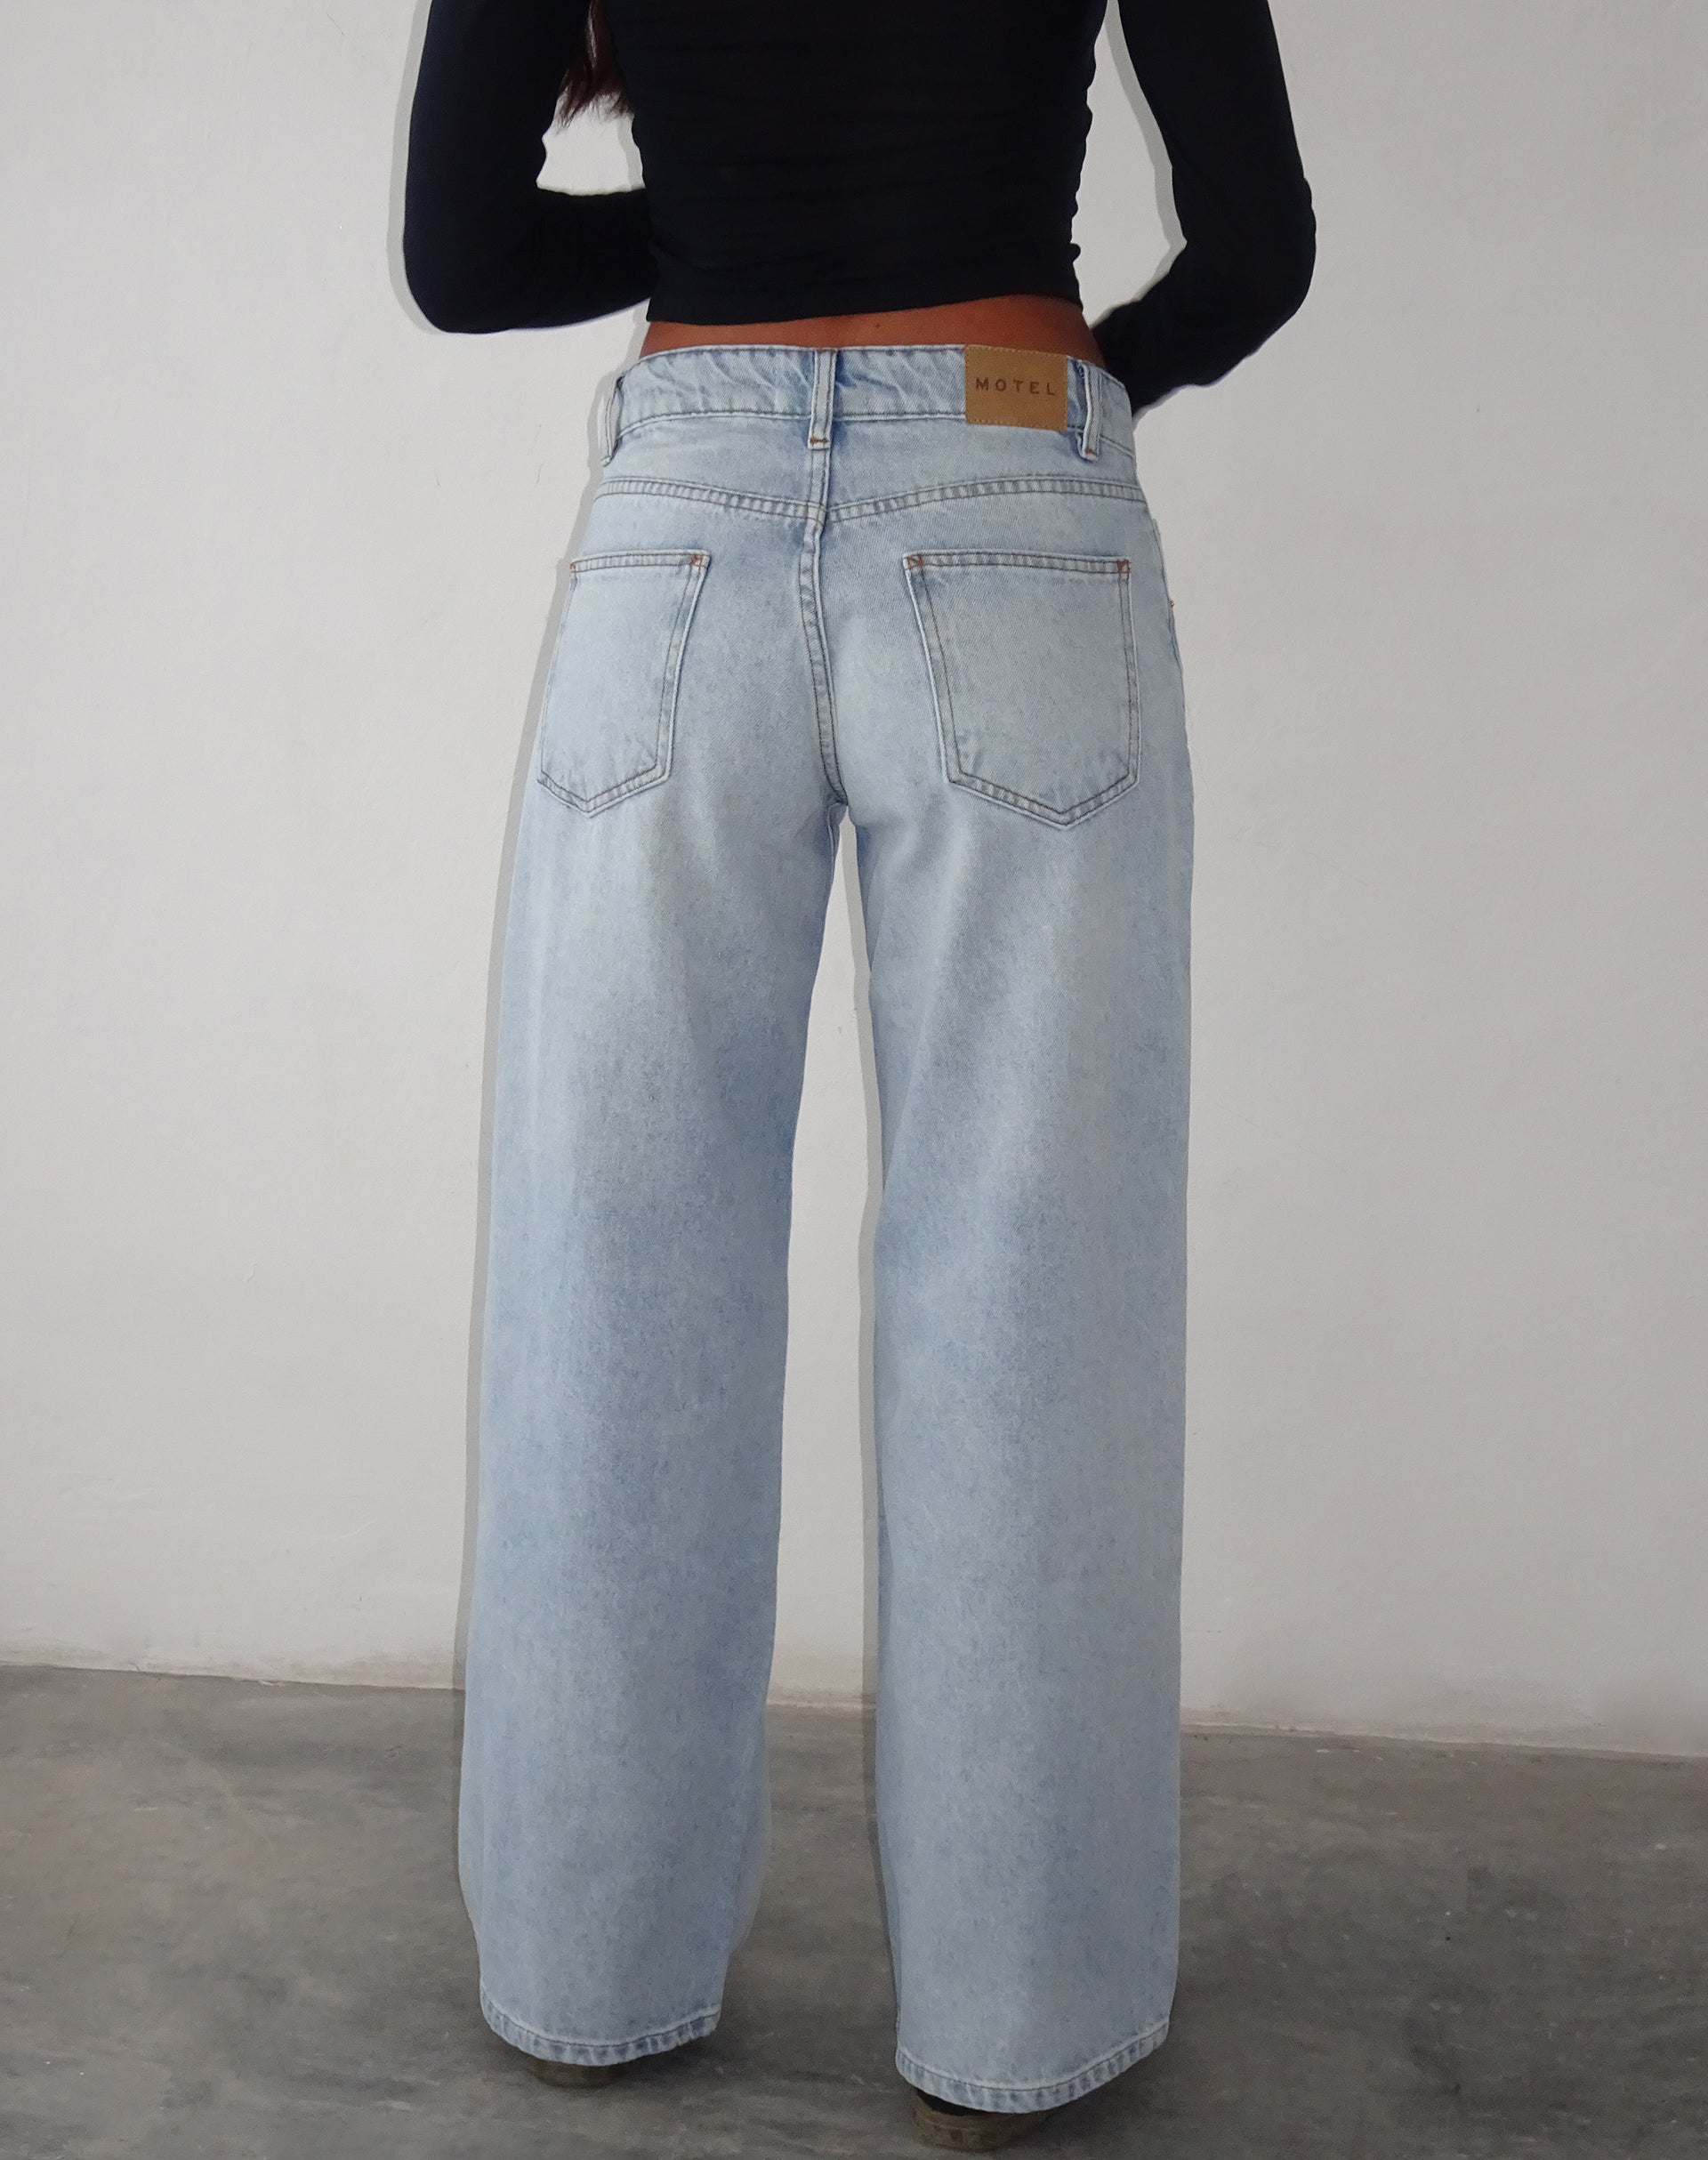 Bild von Roomy Extra Wide Low Rise Jeans in Extreme Light Blue Wash